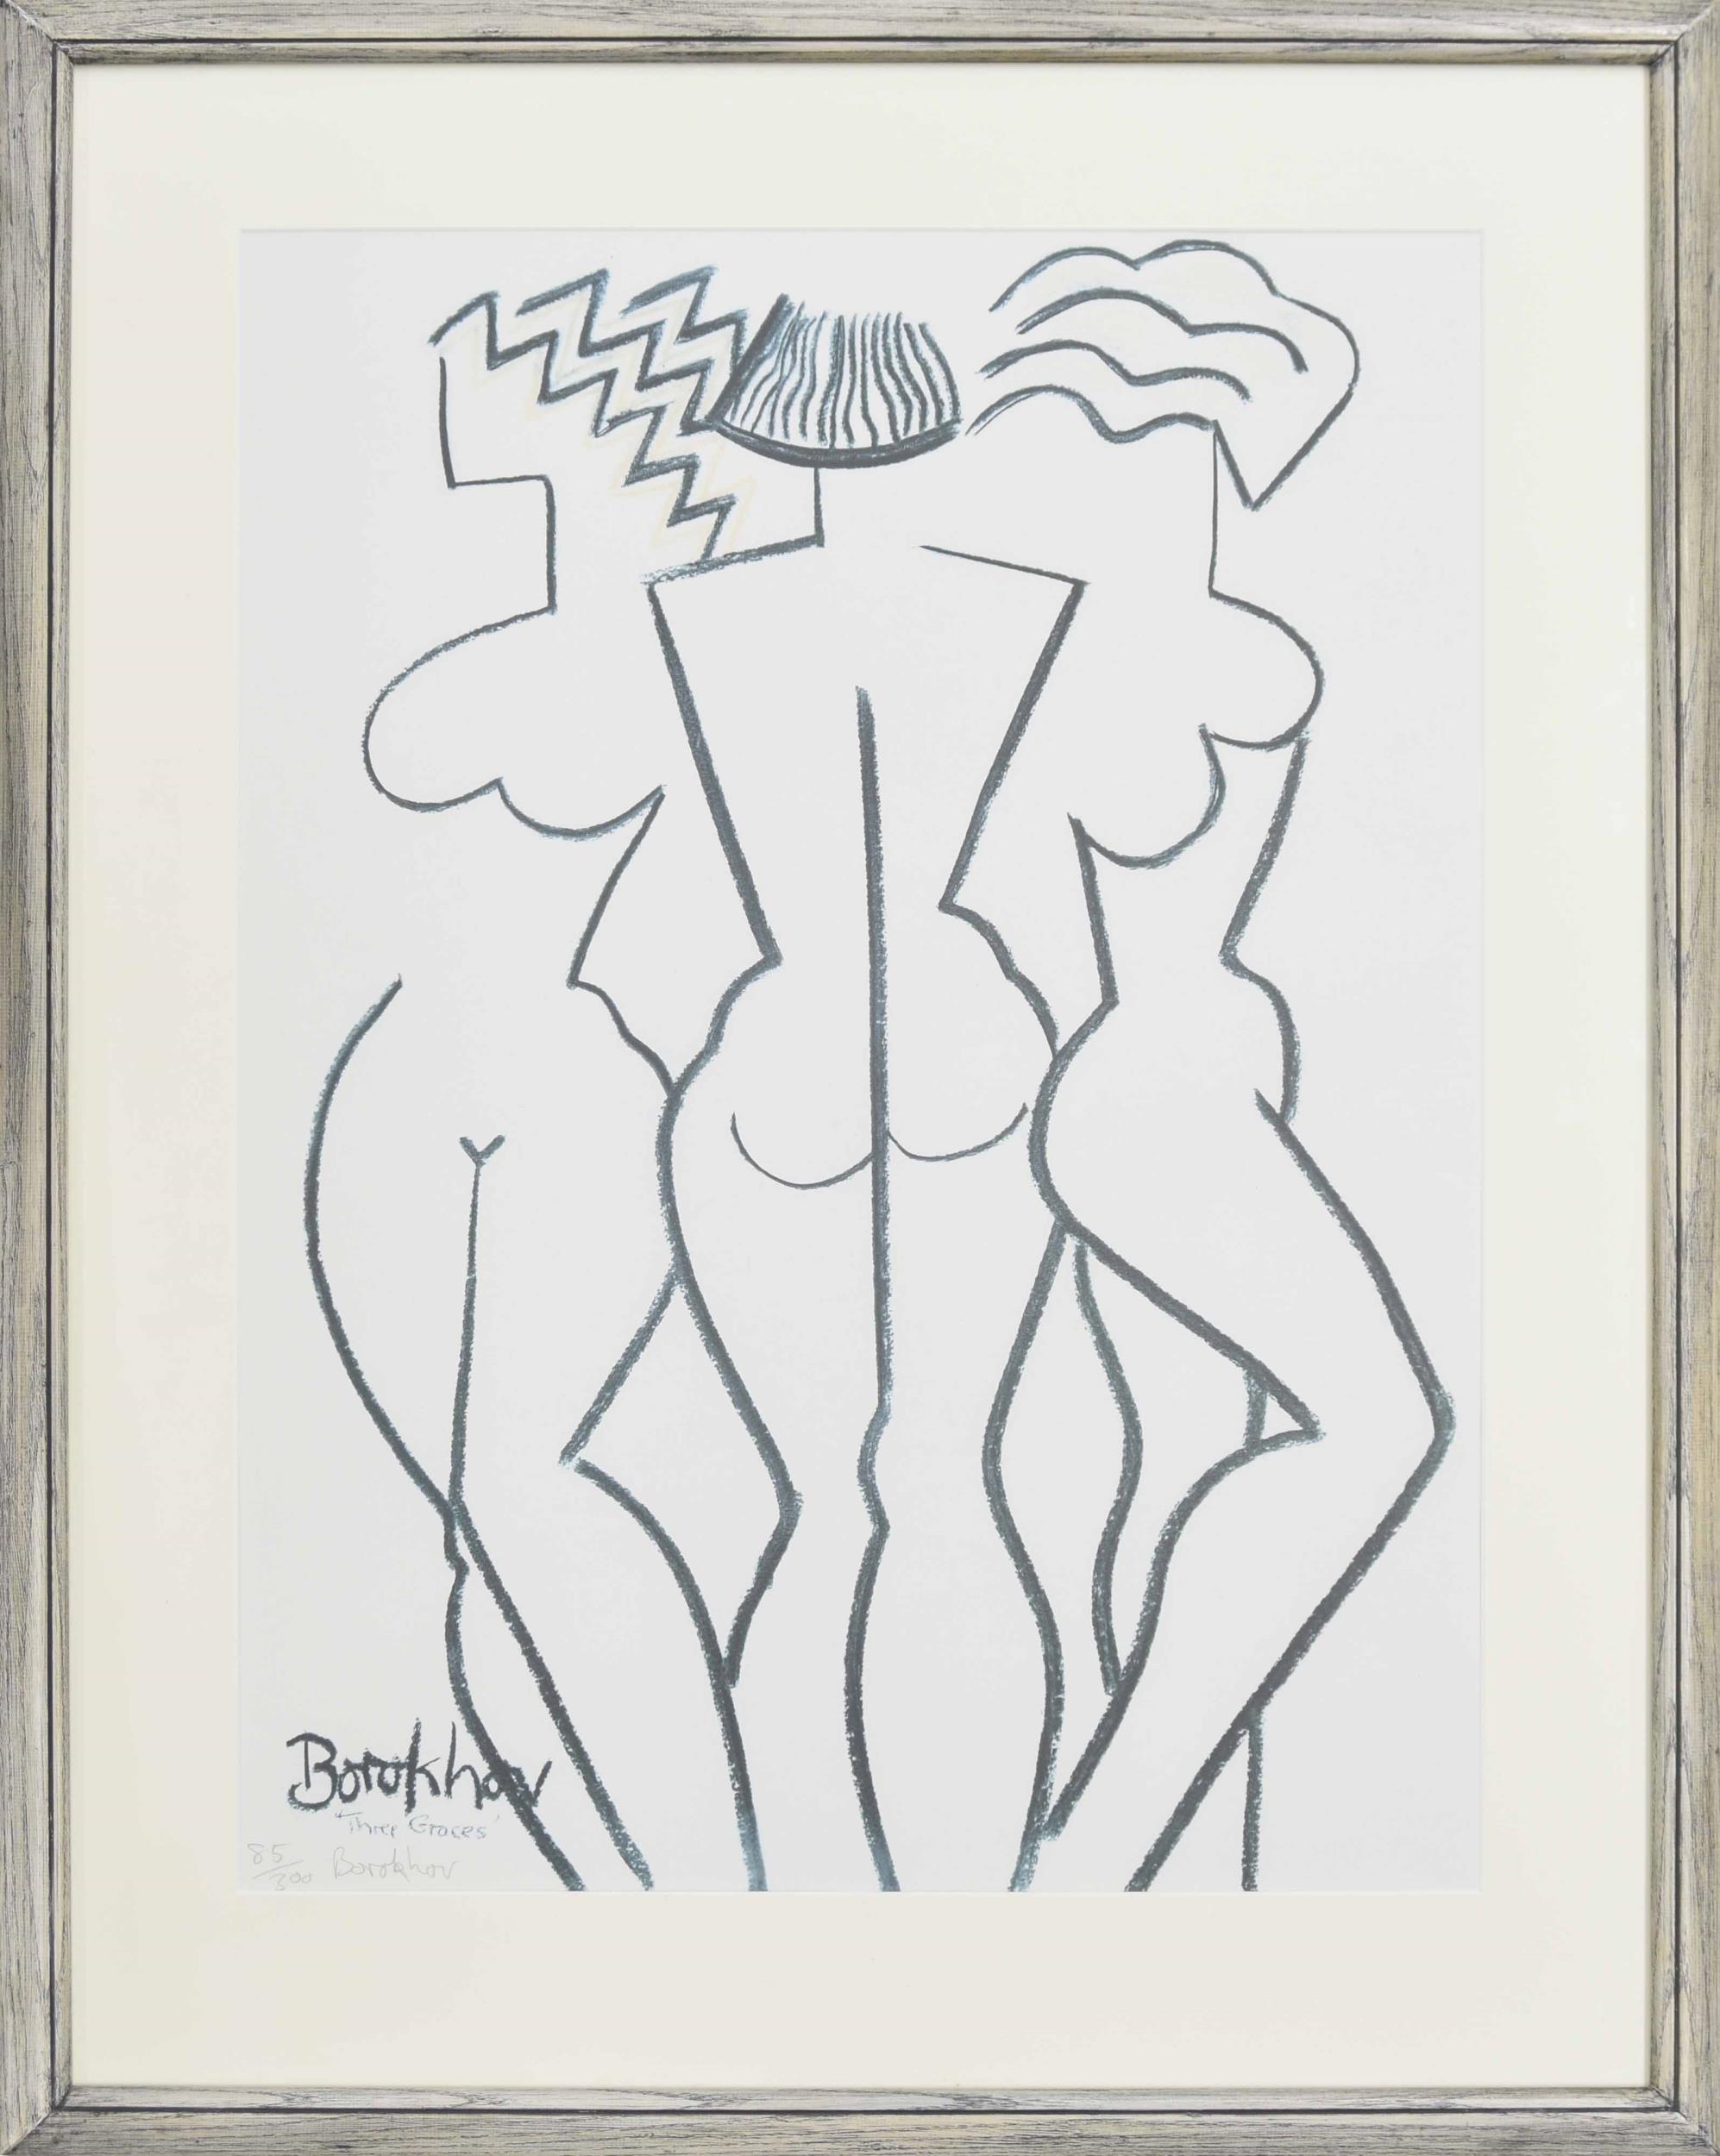 Shirley Borokhov (20th century) - 'Three Graces' limited edition signed artist's proof 85/300, 25.